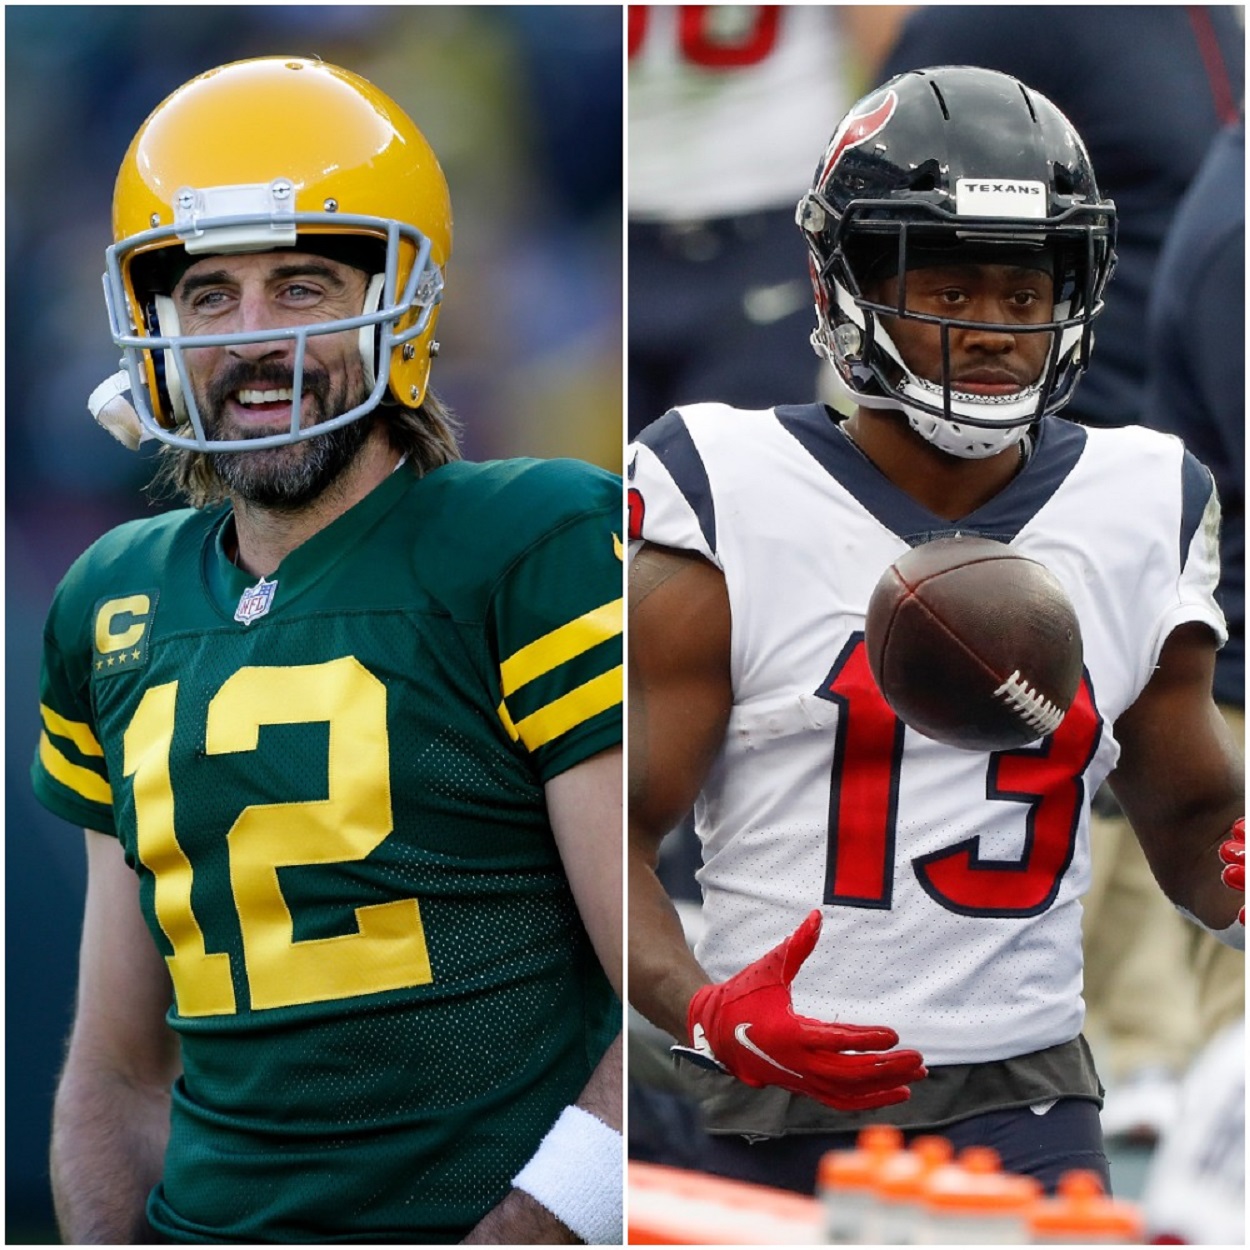 The Green Bay Packers Could Make a Super Bowl-Sized Statement by Once Again Taking Advantage of the Houston Texans at the NFL Trade Deadline